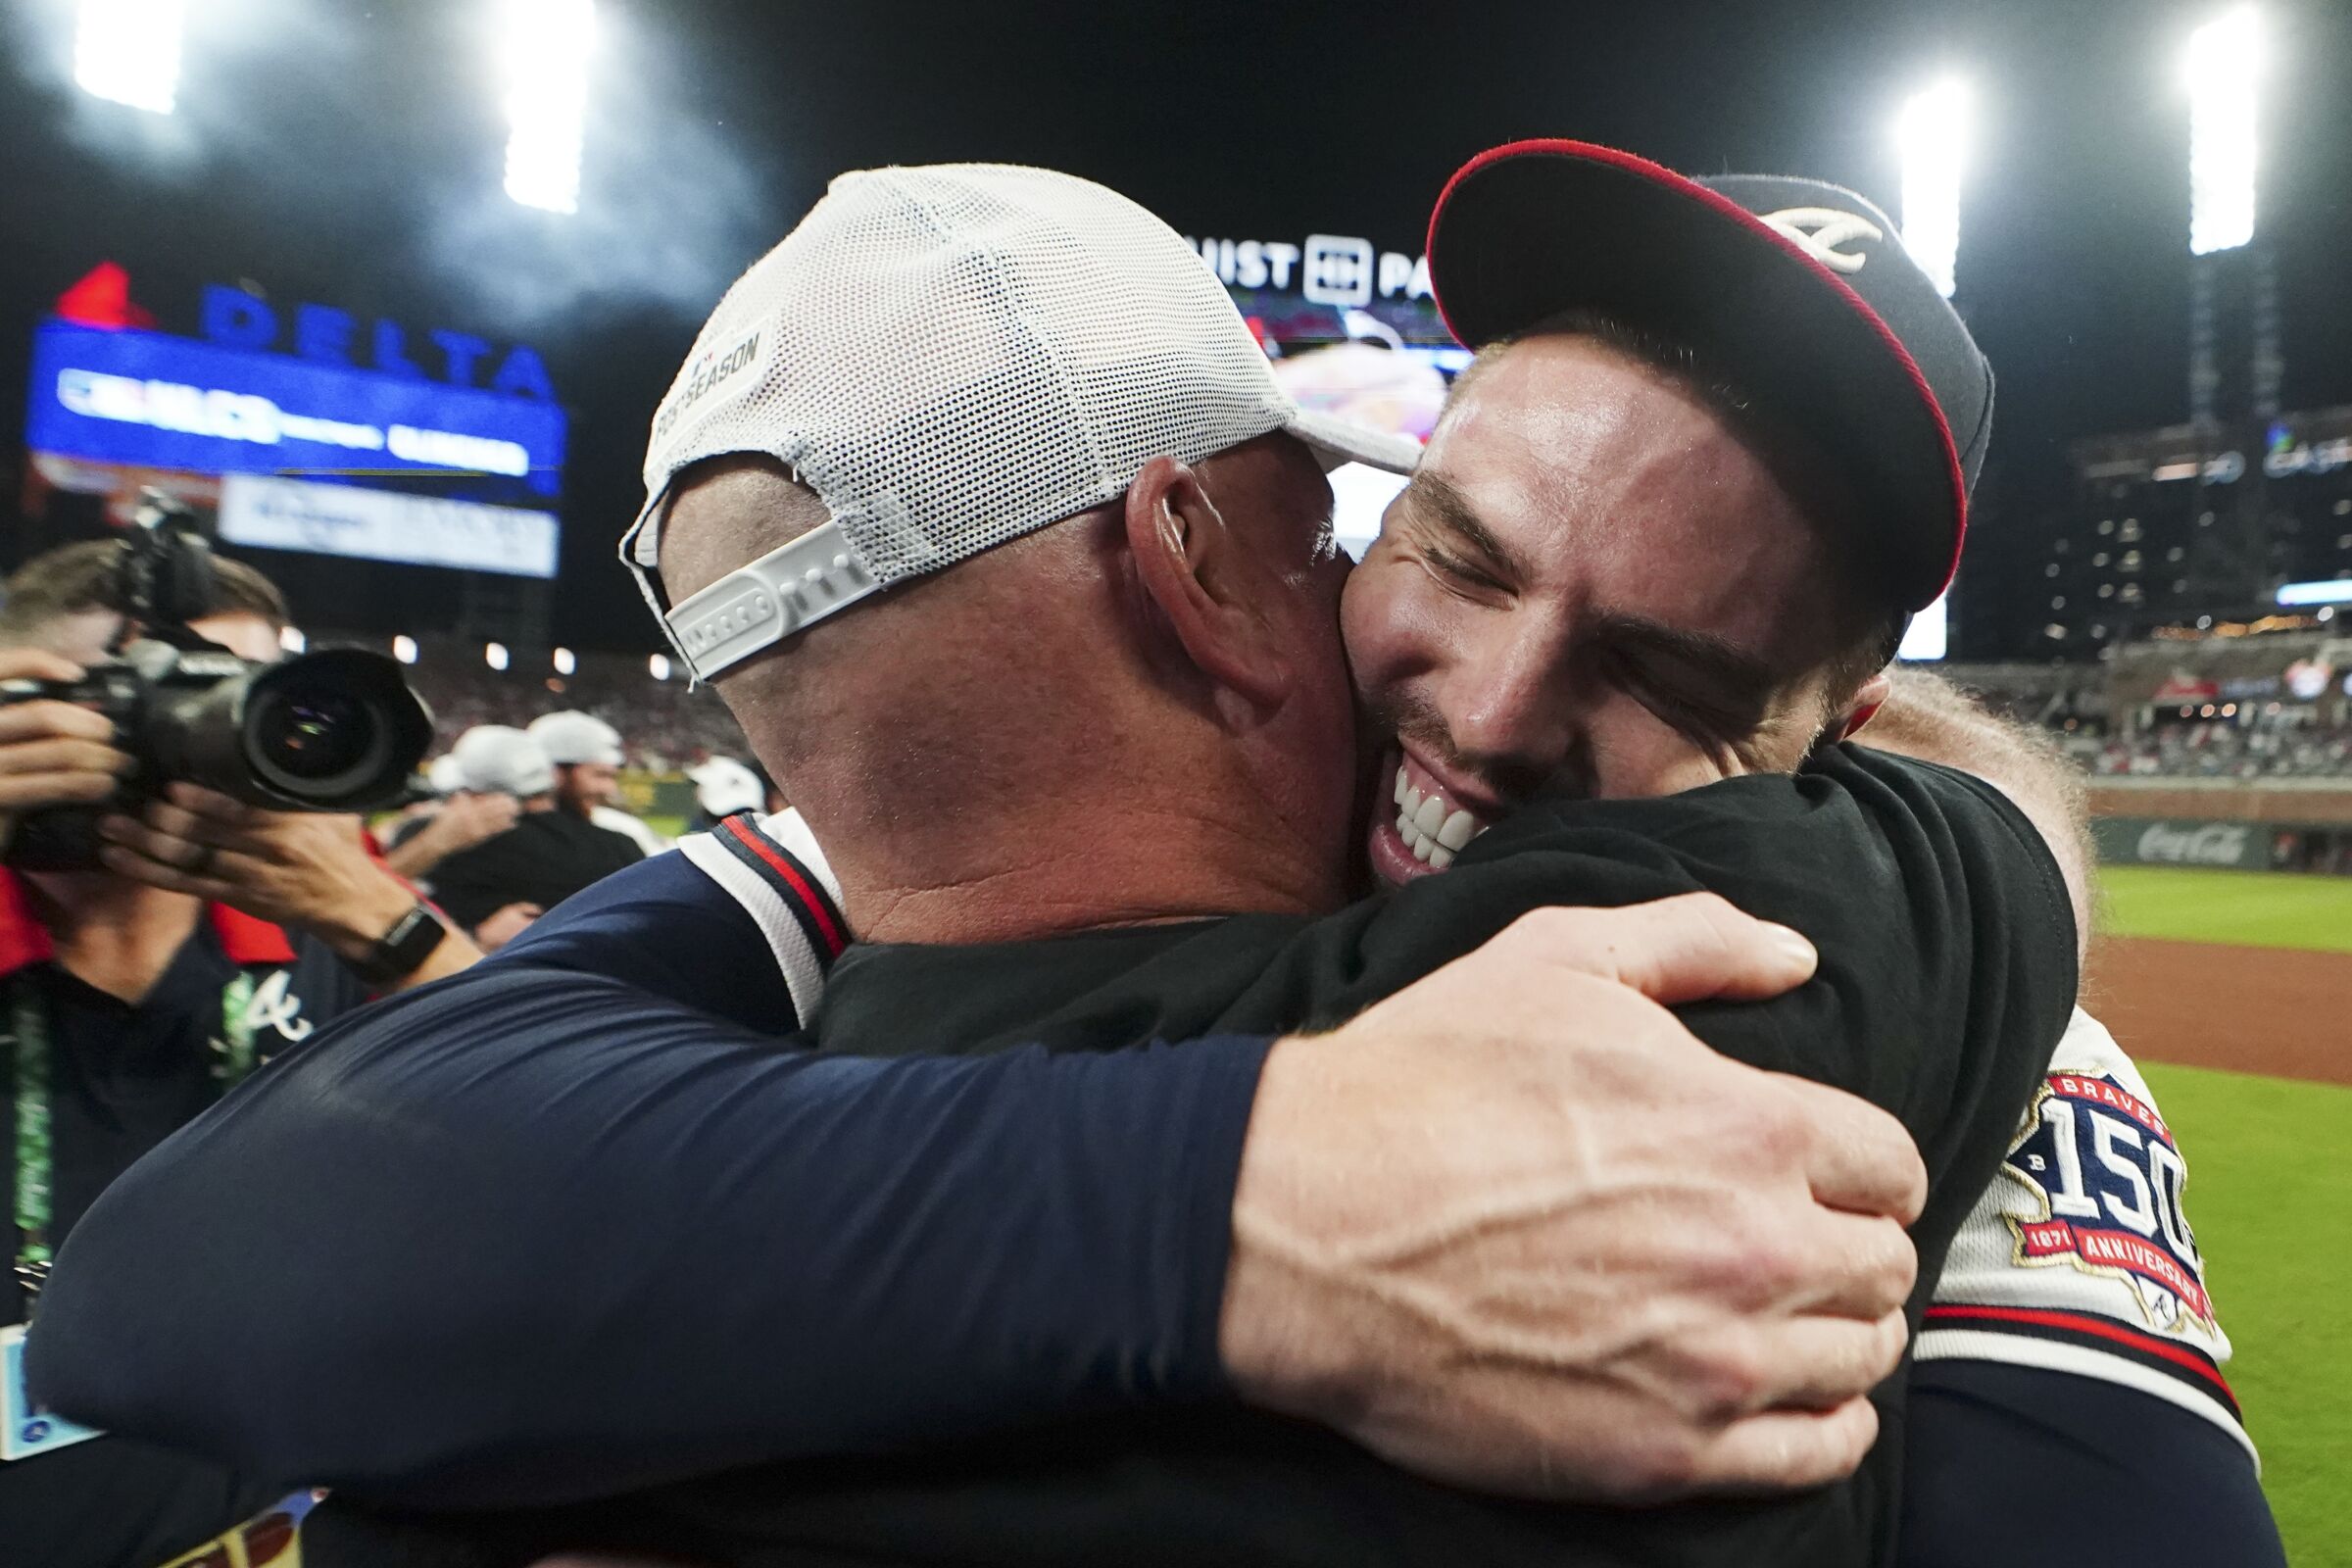 Freddie Freeman embraces manager Brian Snitker after the Braves defeated the Brewers in Game 4 .